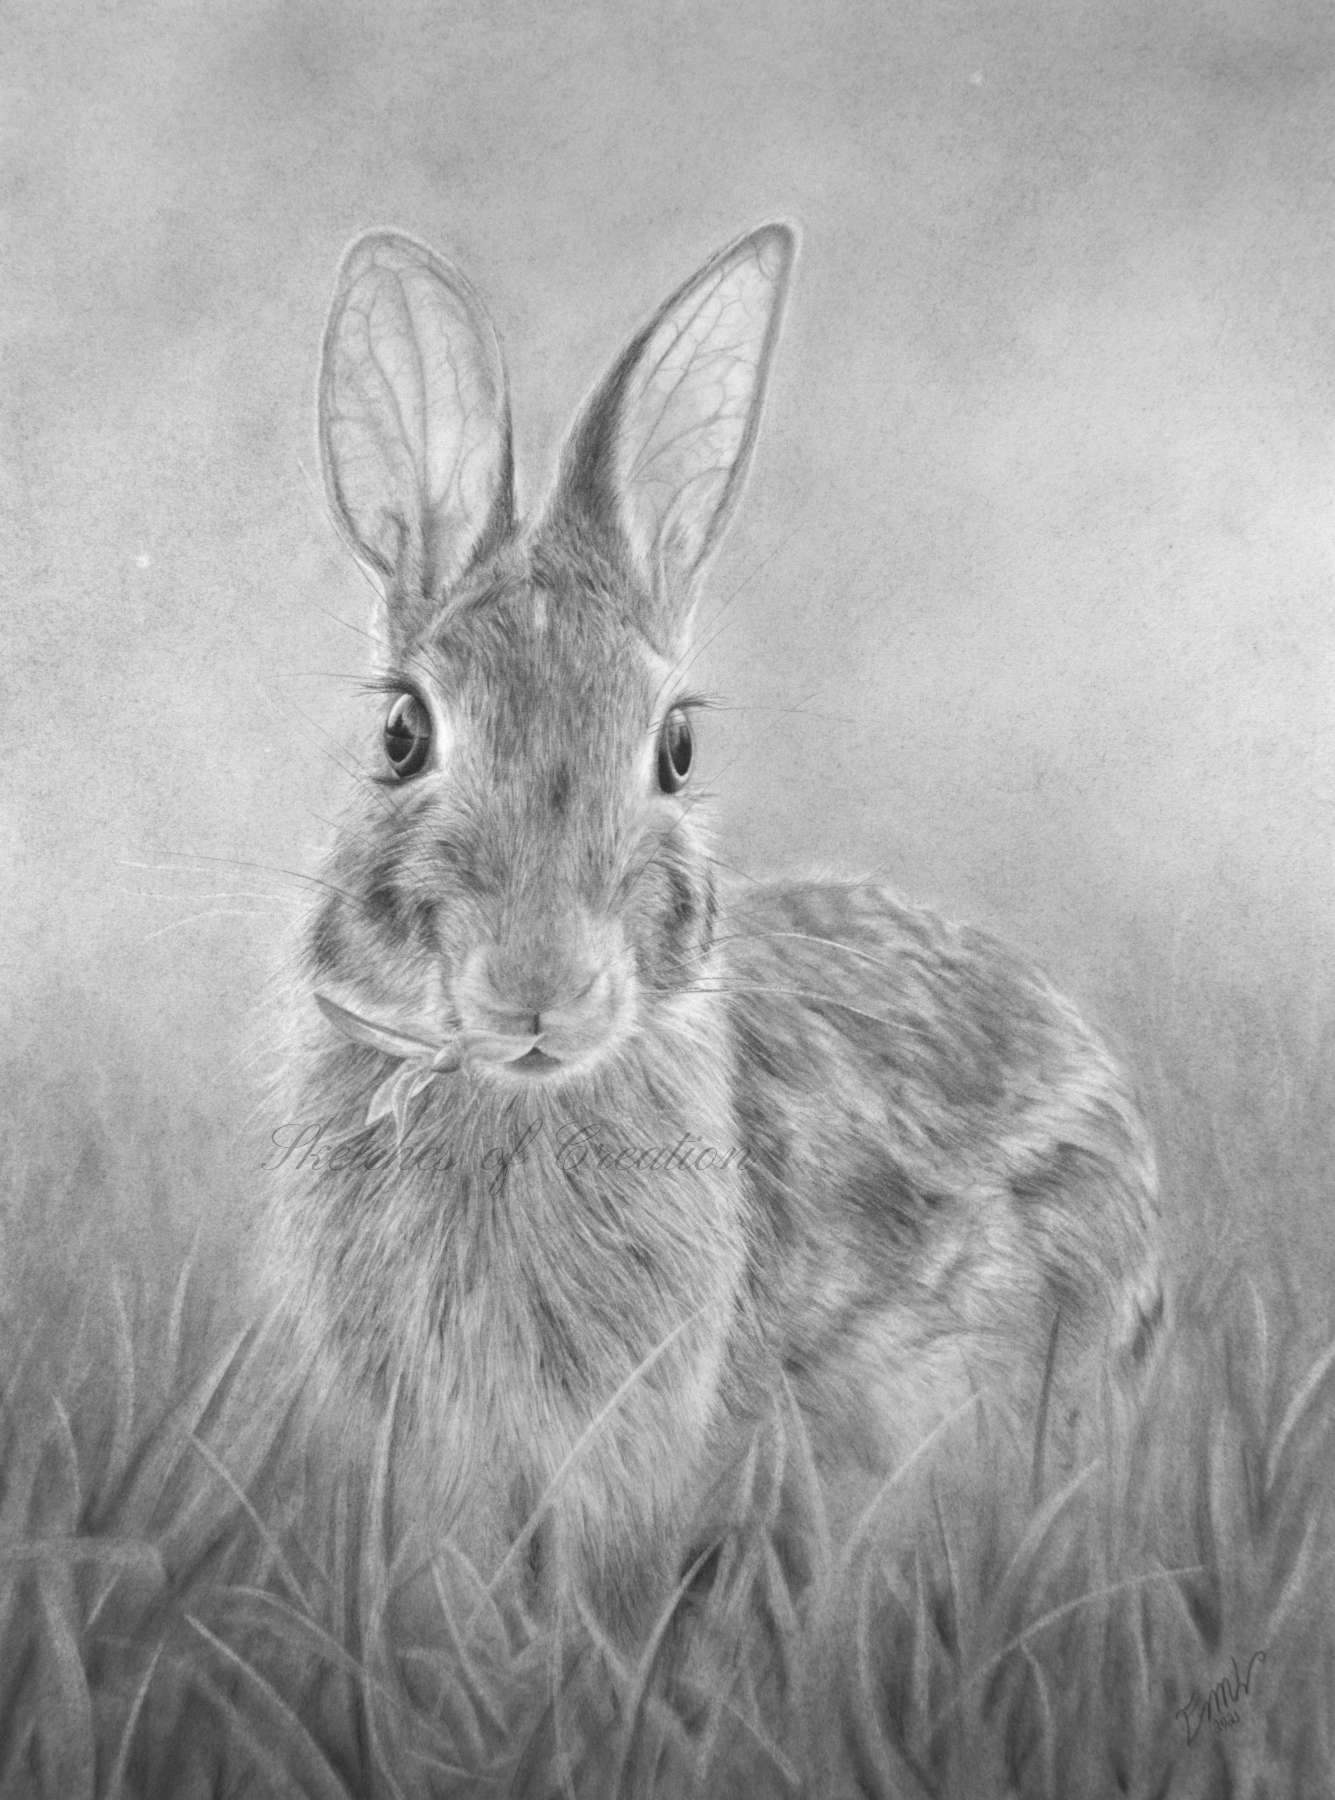 A drawing of a rabbit eating and looking at the viewer